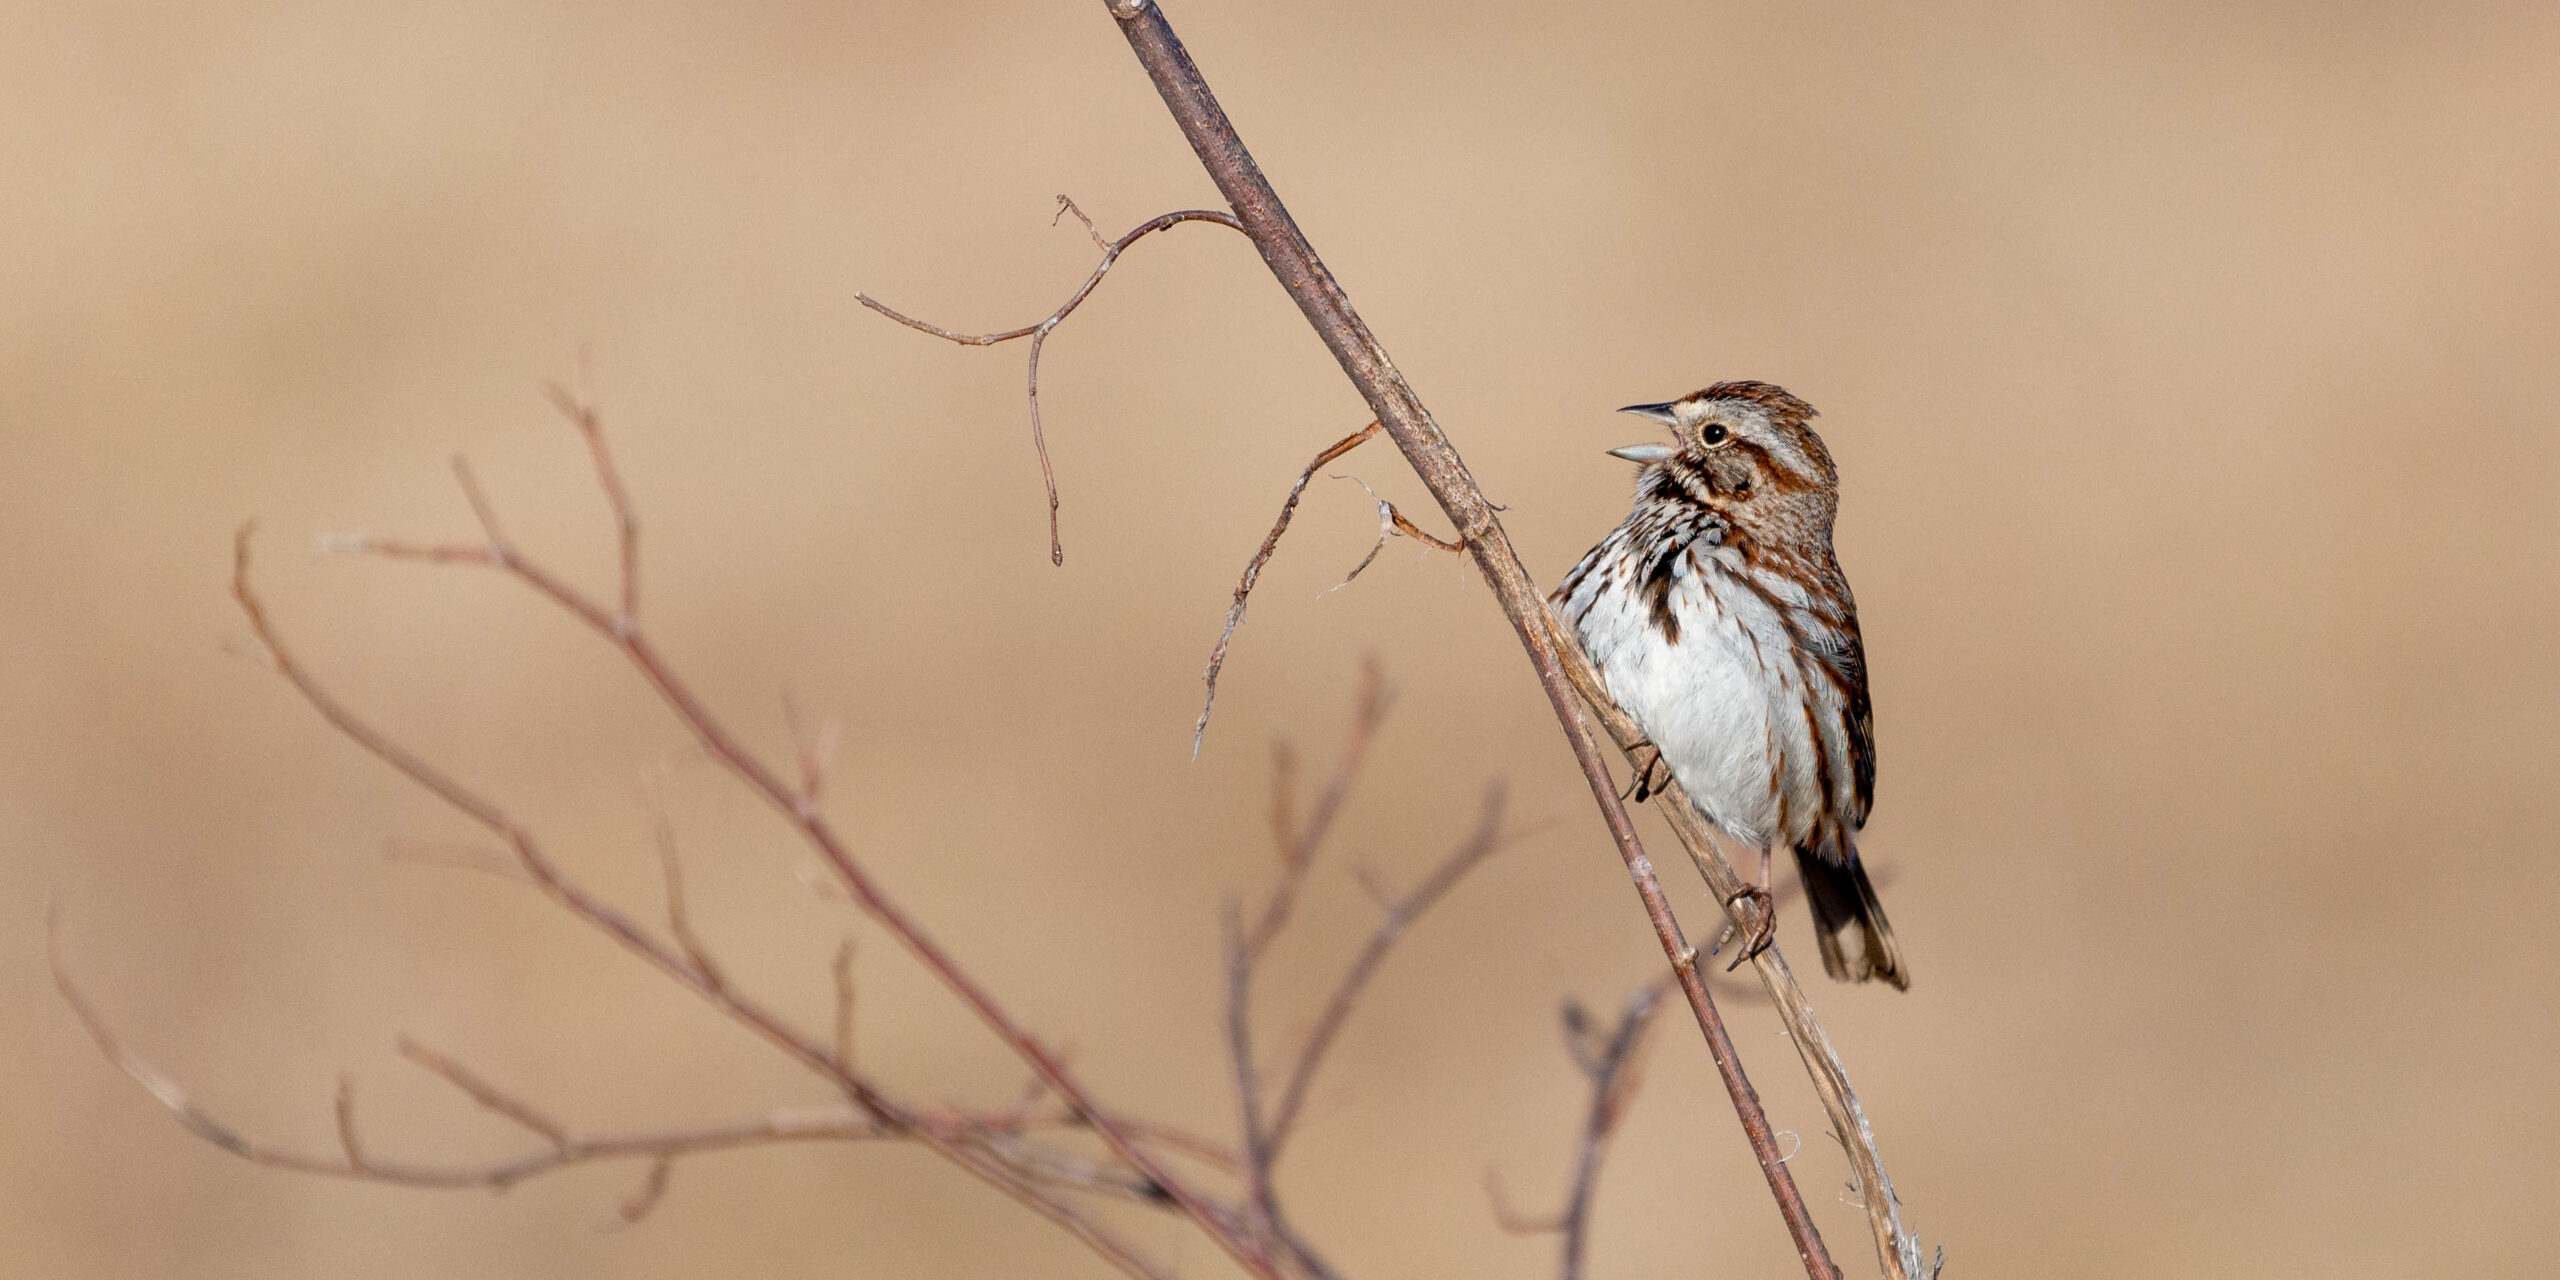 Image of a singing song sparrow perched on a plant stem